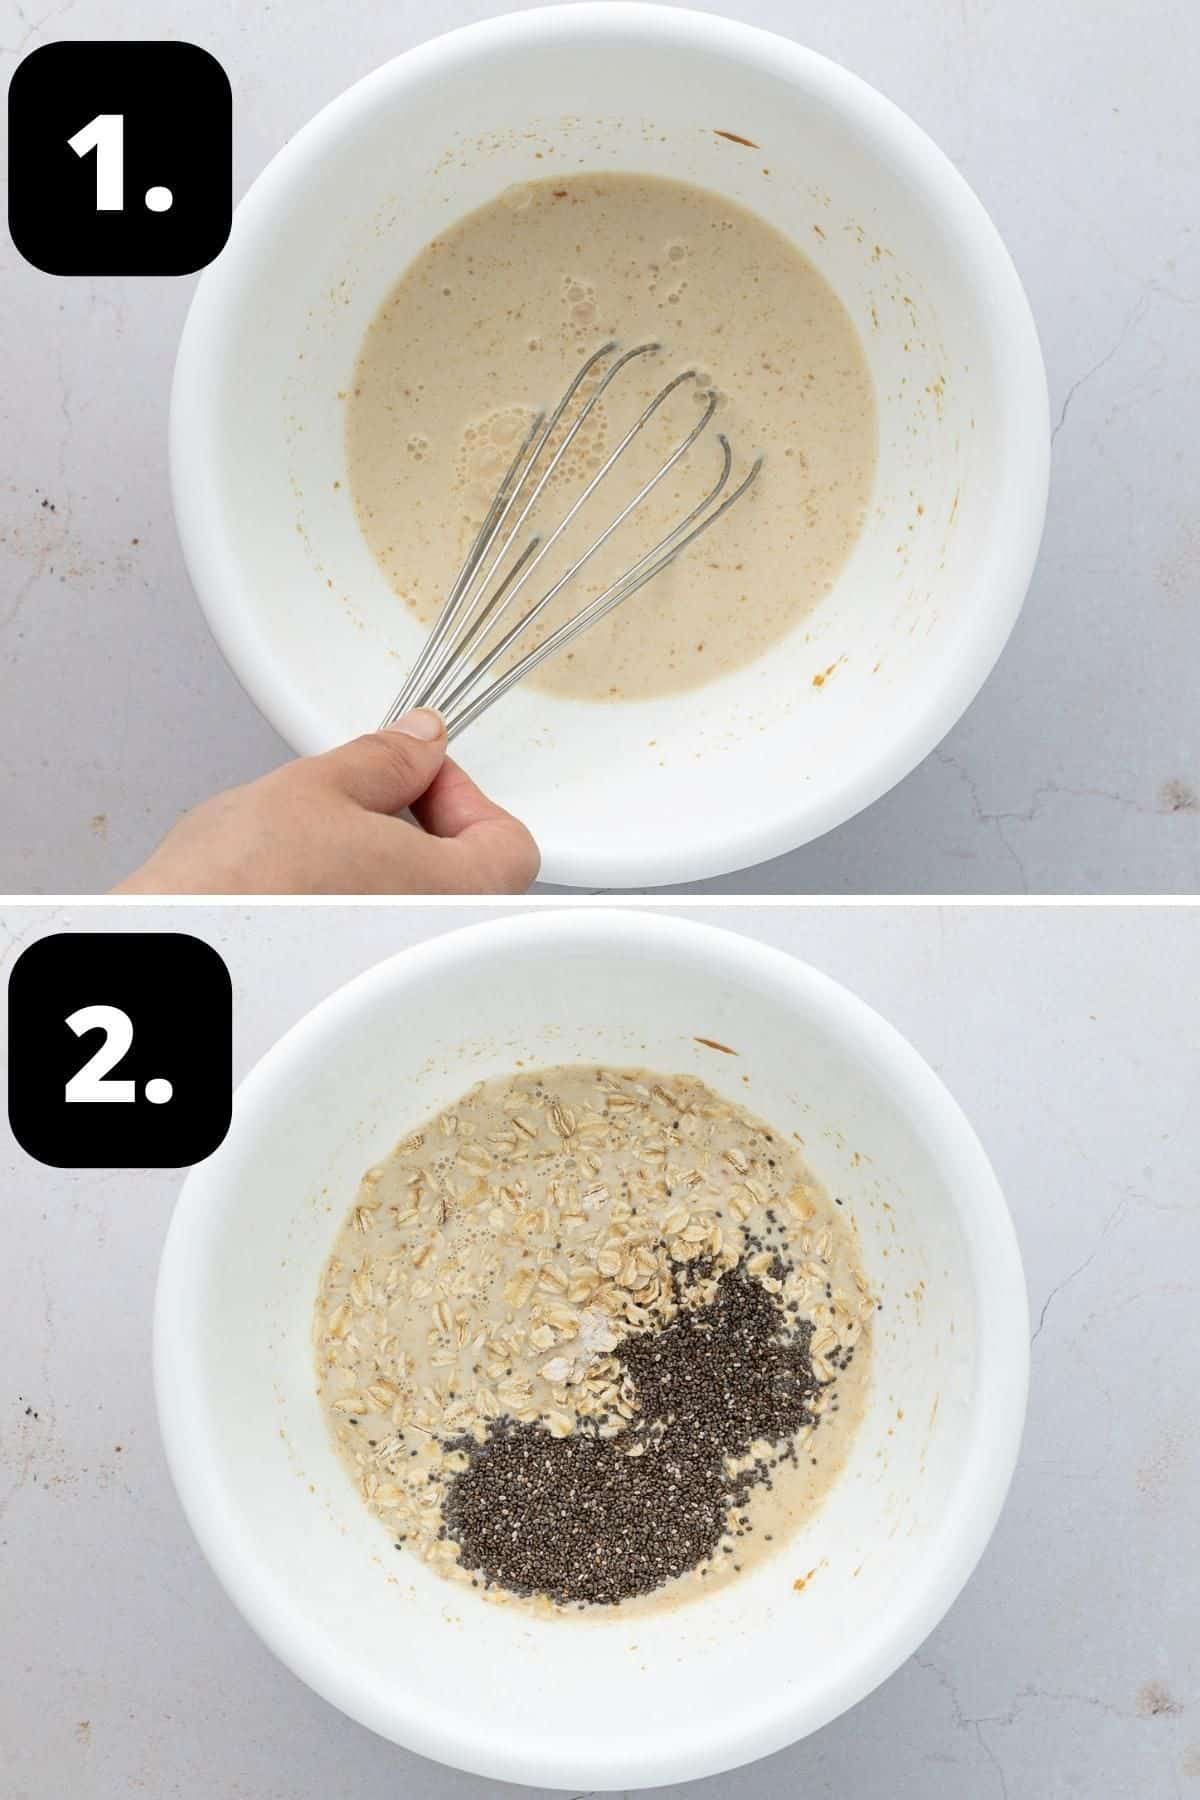 Steps 1-2 of preparing this recipe - whisking the Biscoff spread with milk in a bowl and the remaining ingredients added.